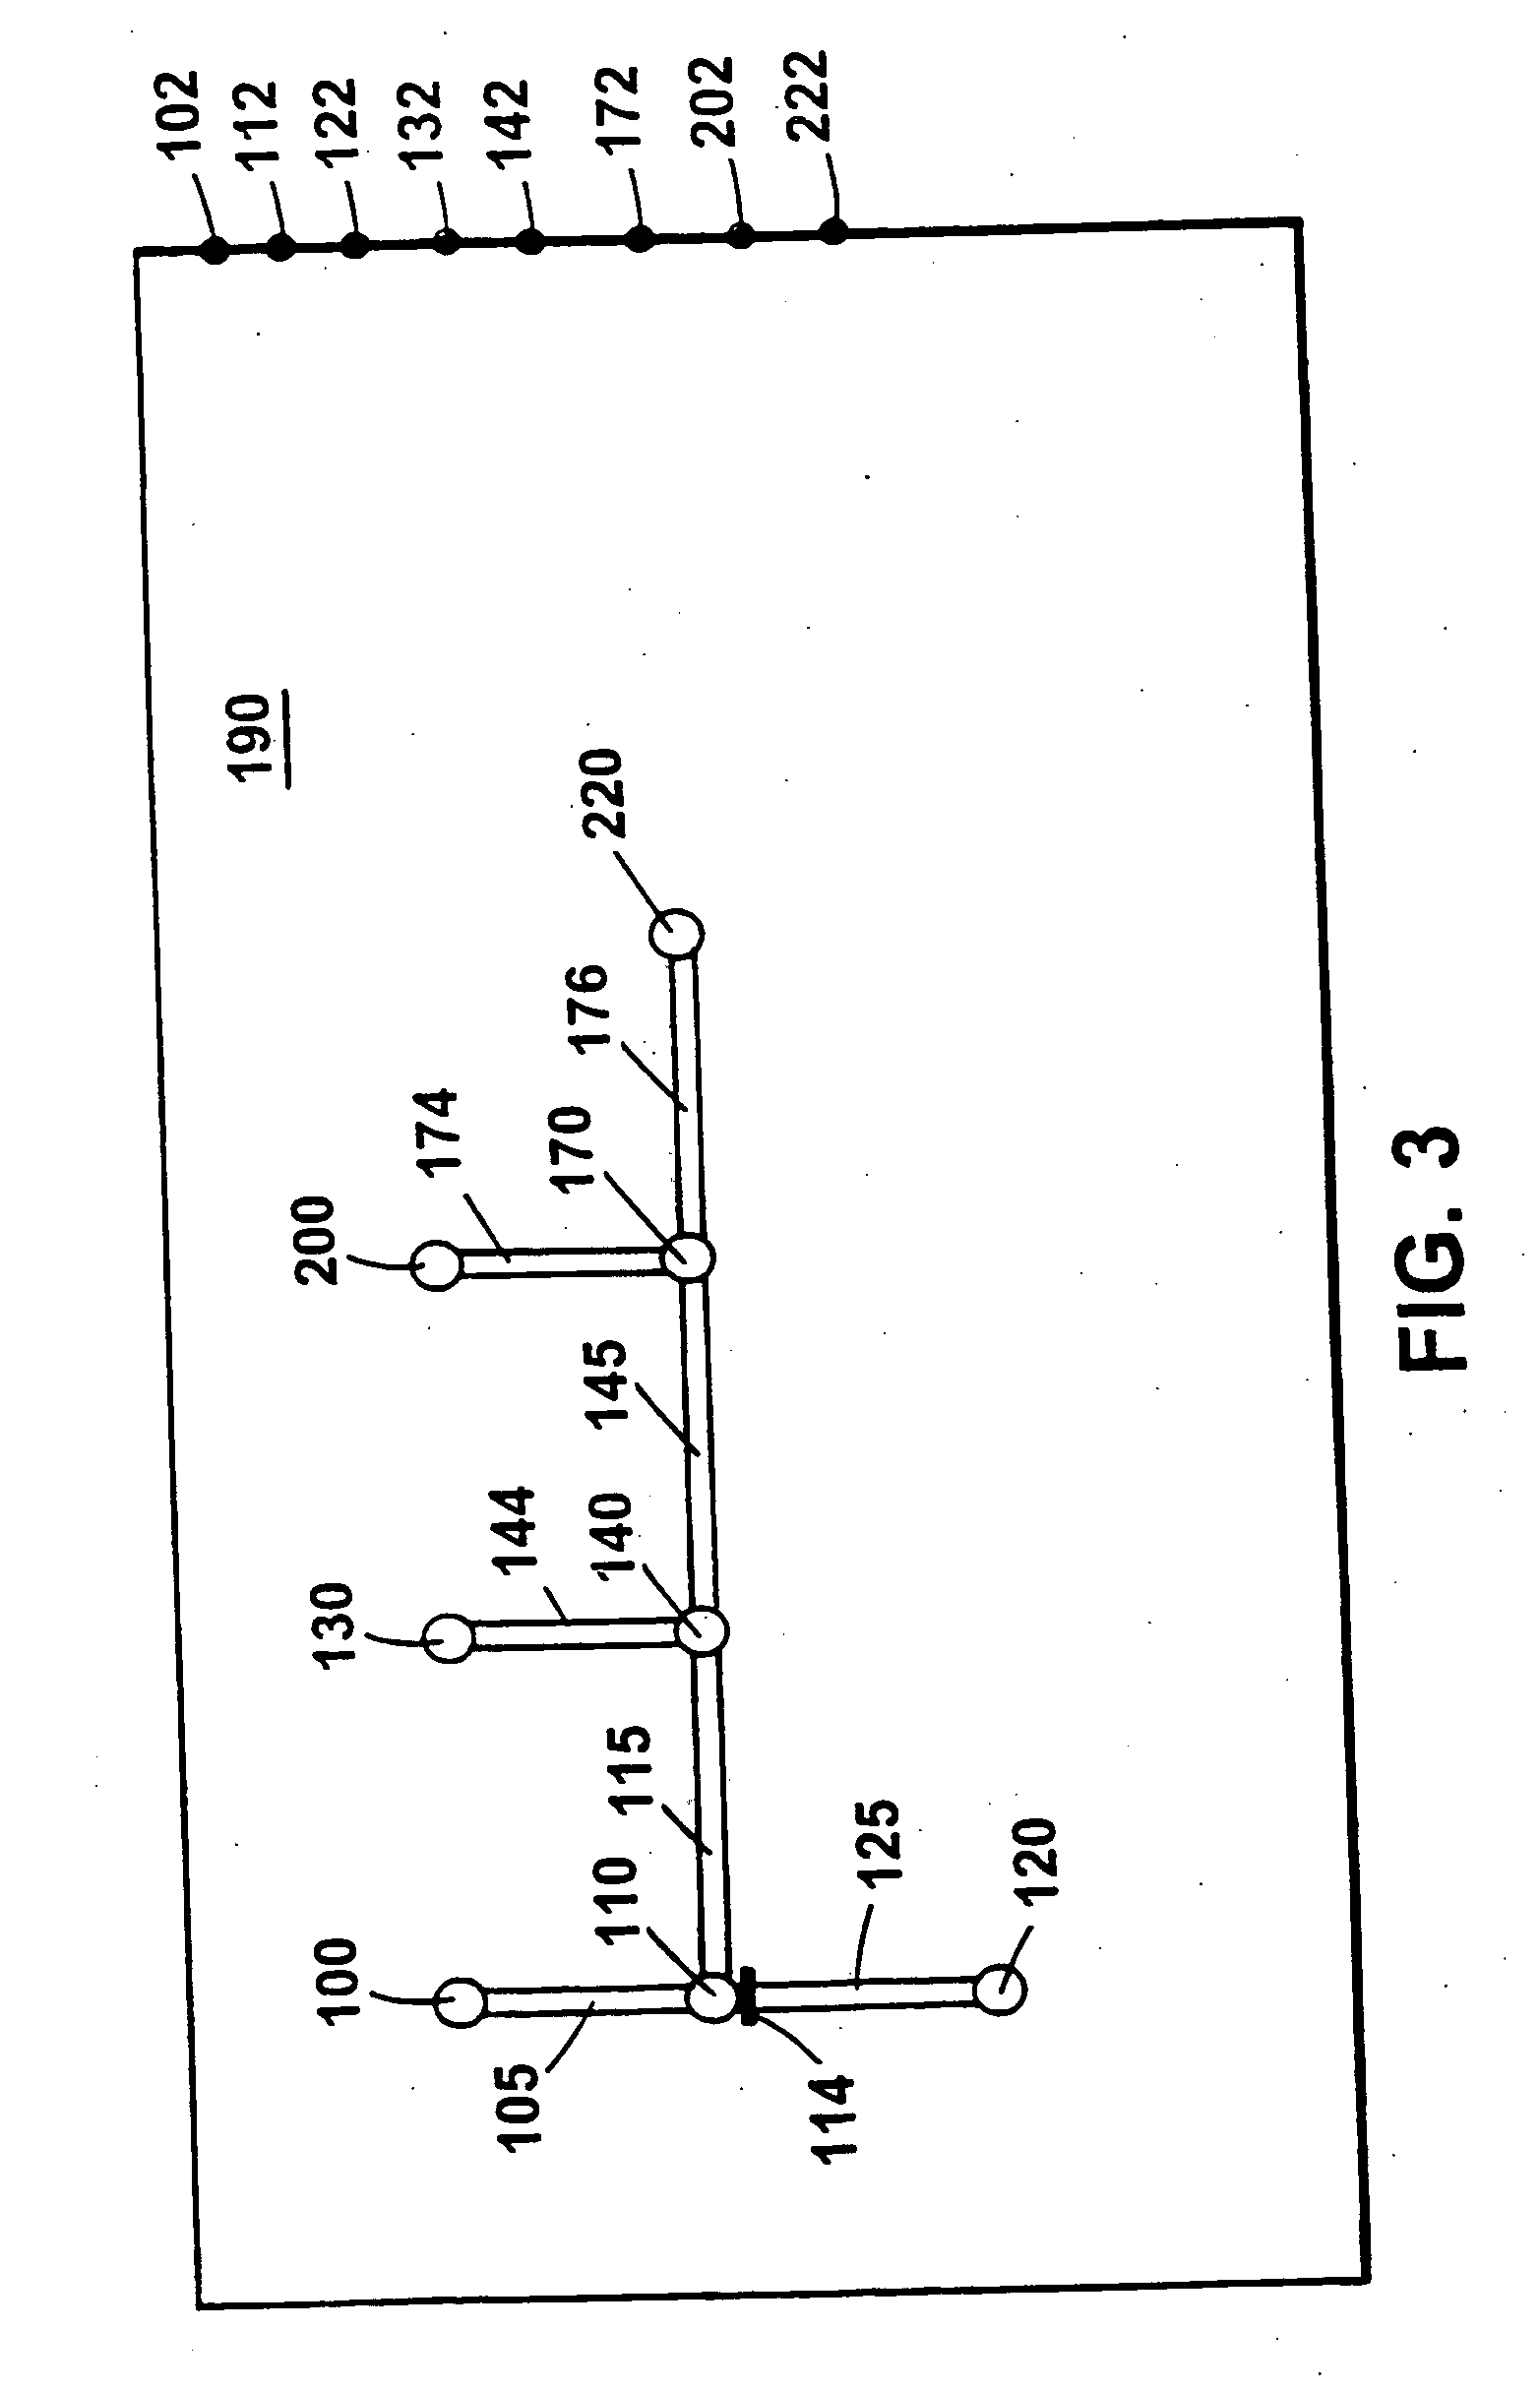 Pressure-enhanced extraction and purification